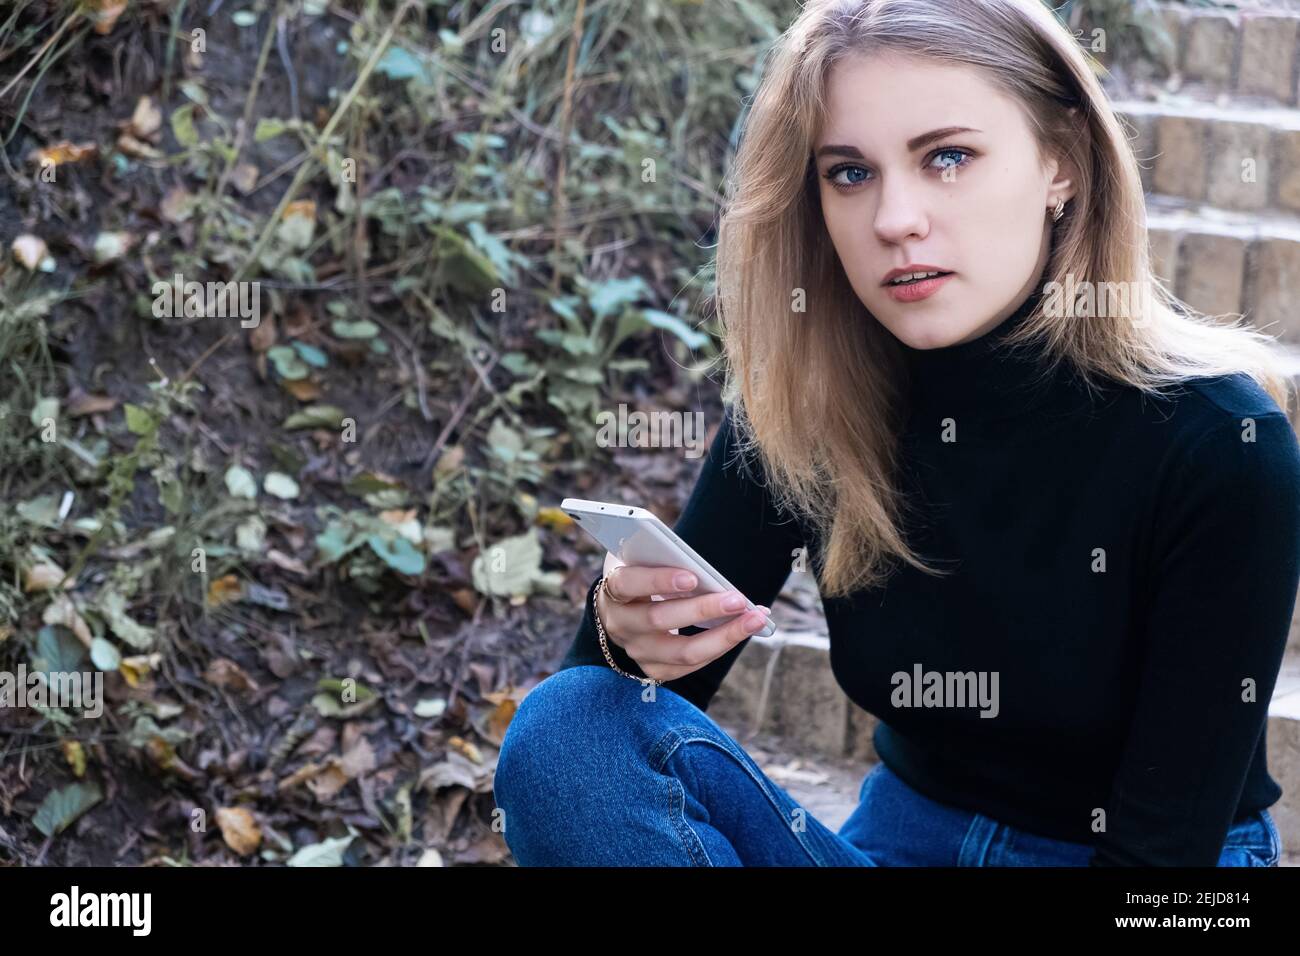 Portrait of a young attractive serious blue eyed woman in a black turtleneck looking into the camera sitting on the steps outside holding a mobile pho Stock Photo